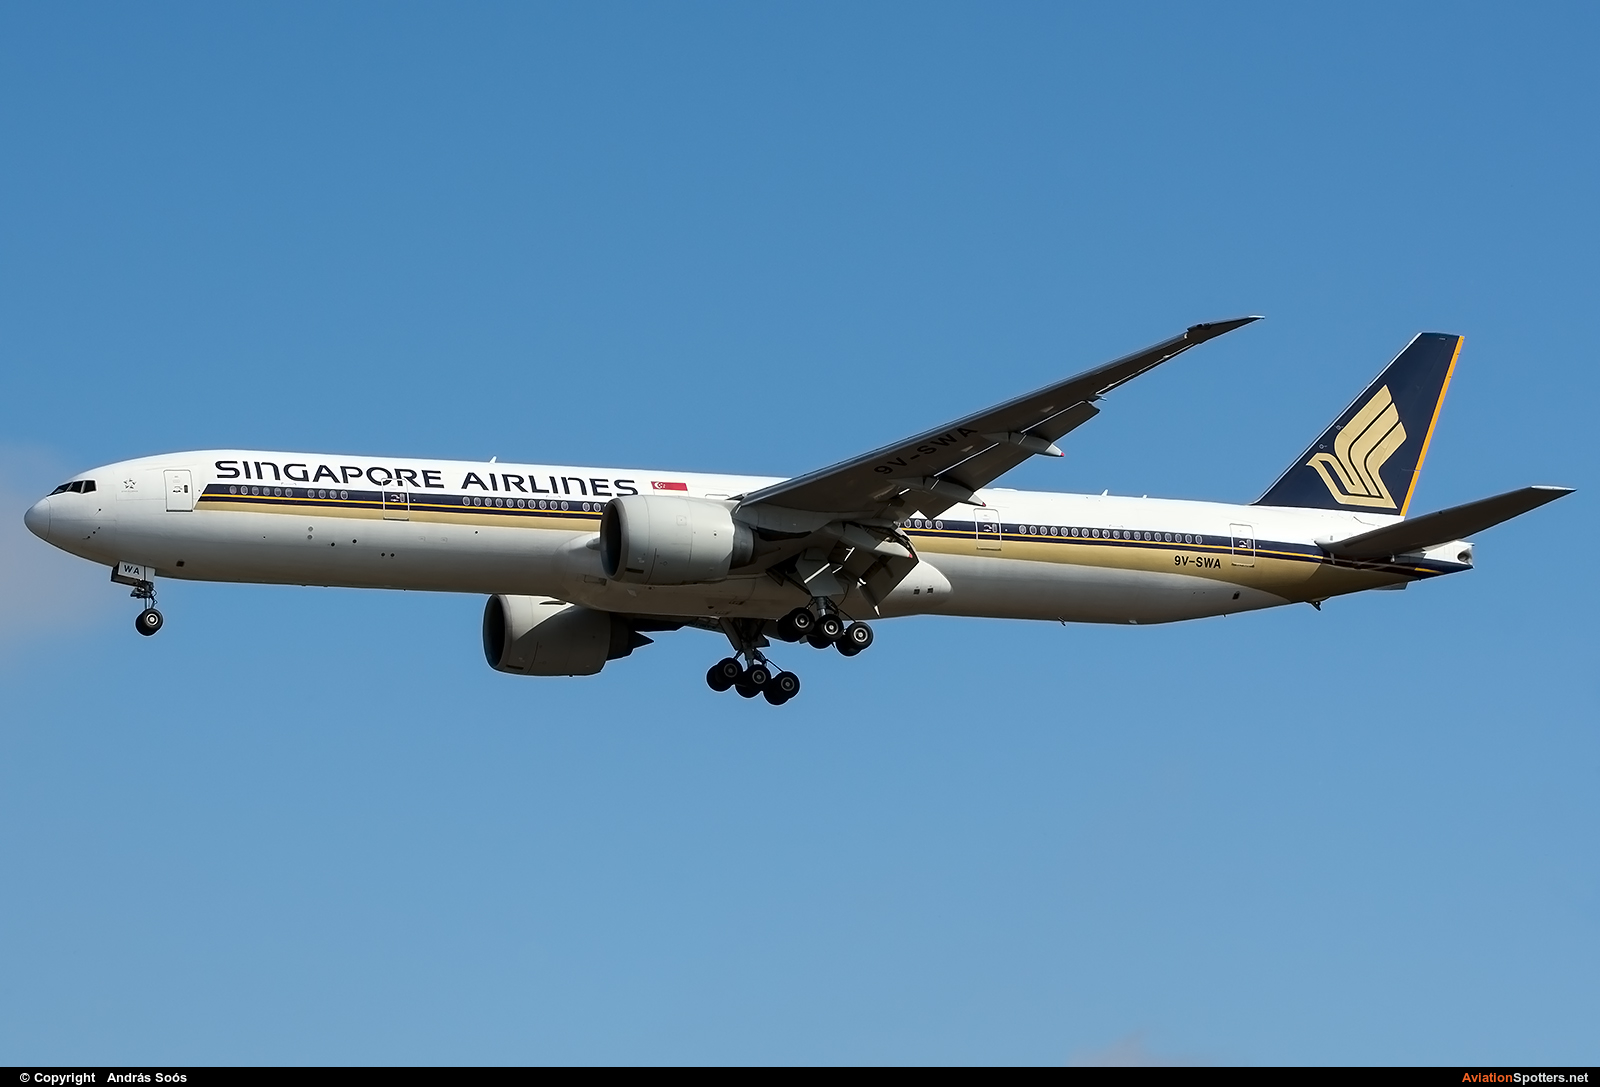 Singapore Airlines  -  777-300ER  (9V-SWA) By András Soós (sas1965)